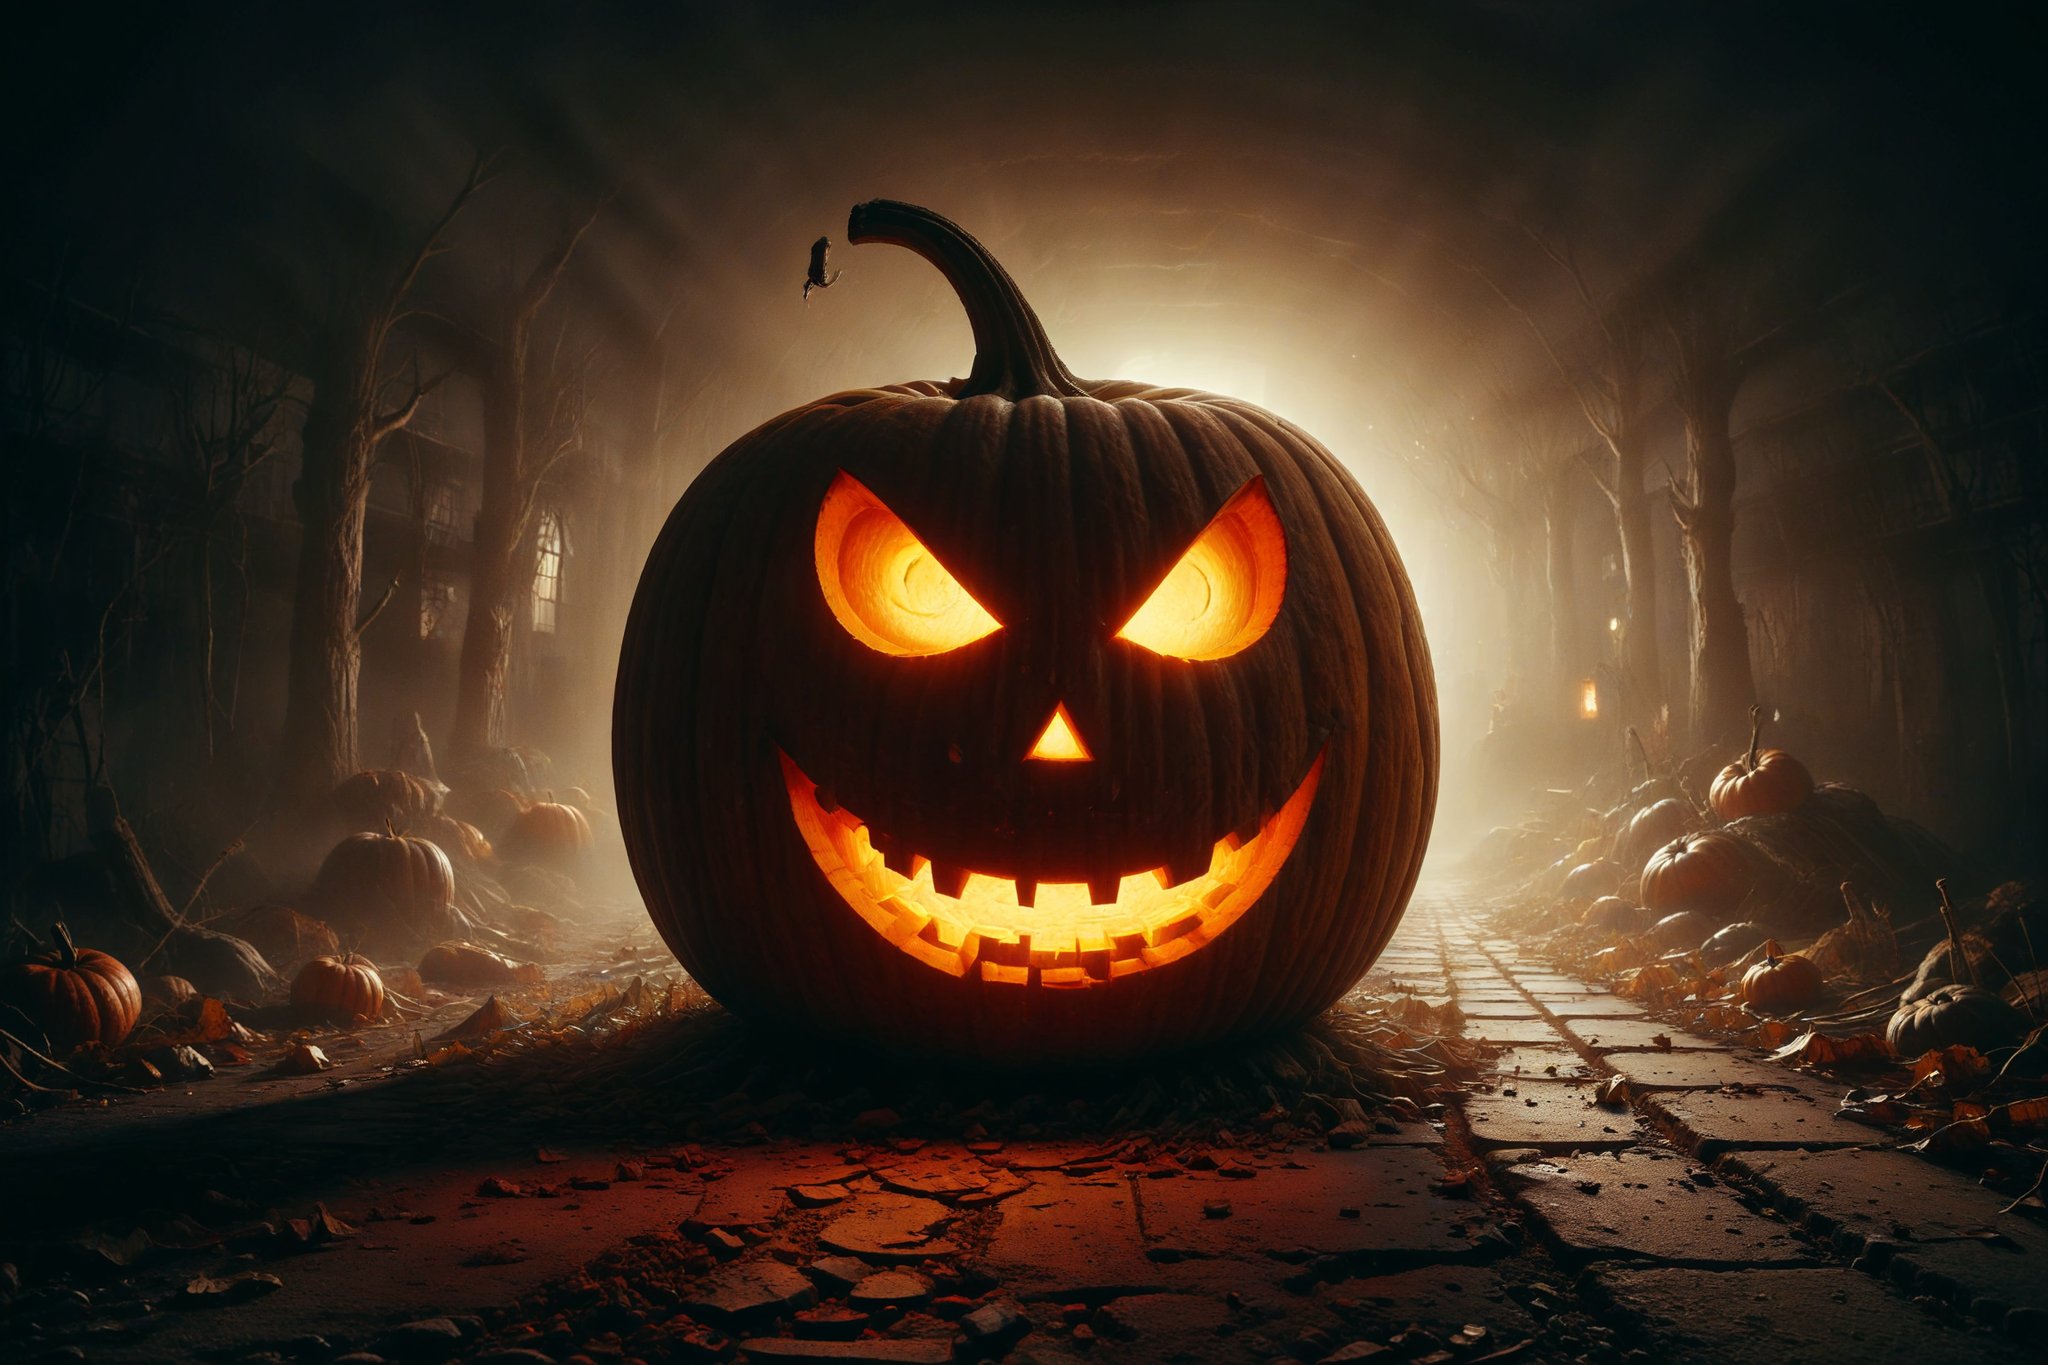 A giant pumpkin carved with a sinister smile, emitting a warm, orange light that illuminates a dark path.